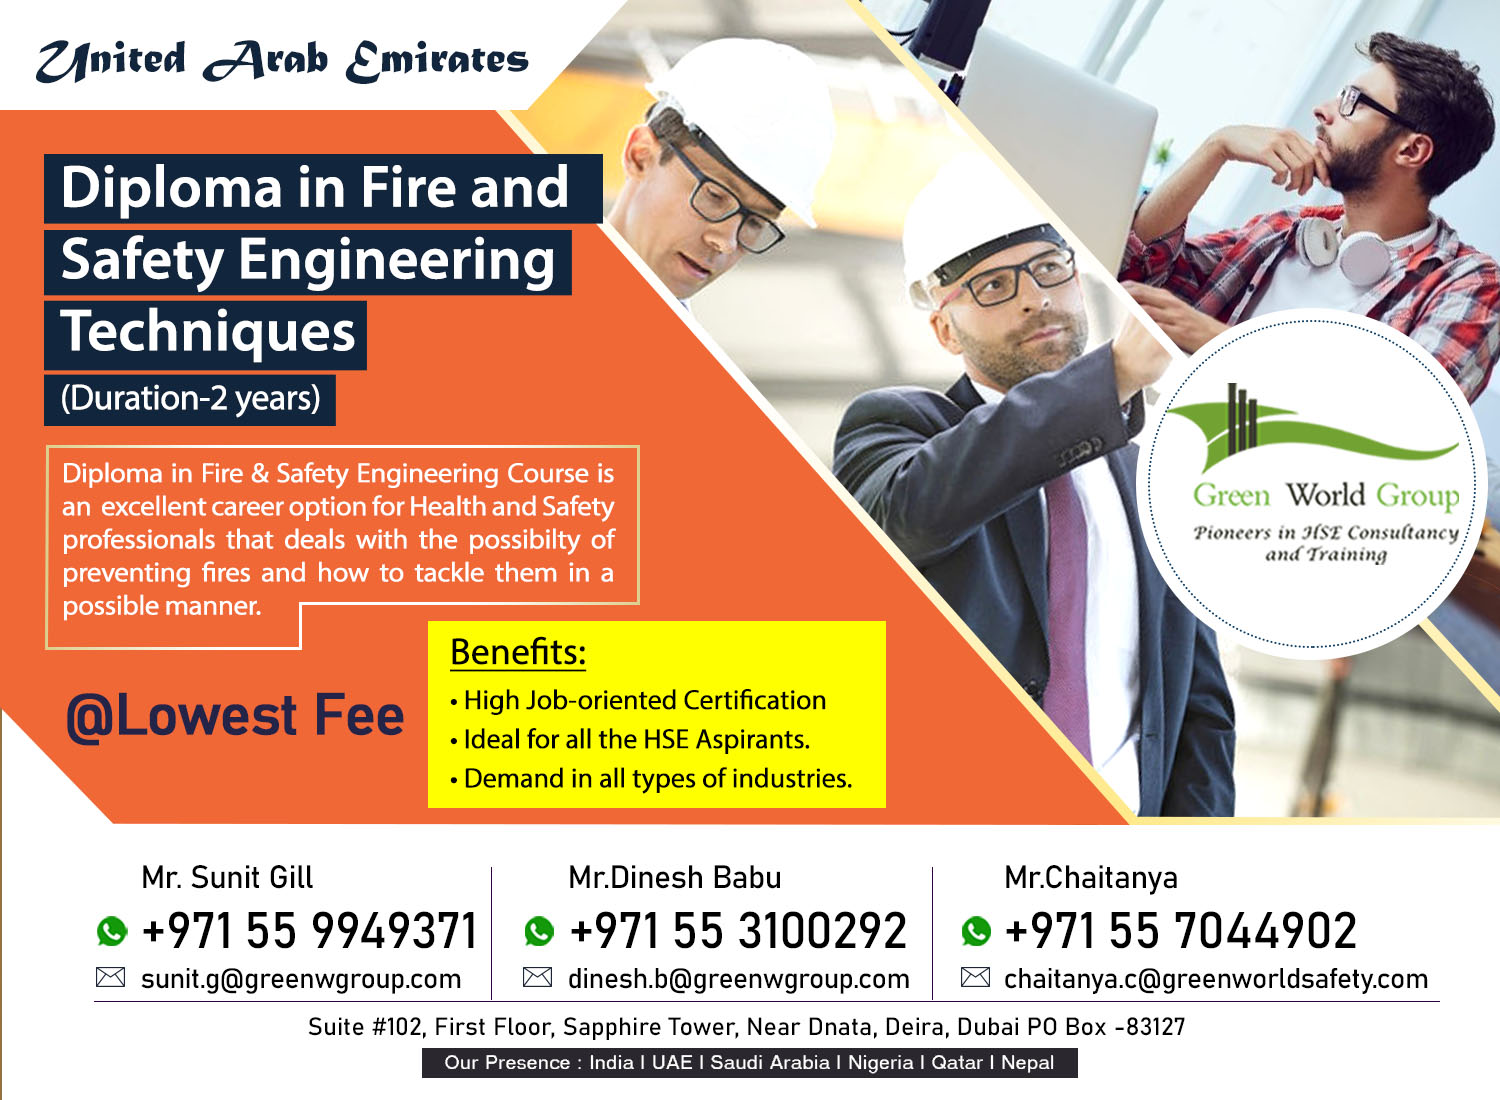 Diploma_in_Fire_and_Safety_Engineering_Techniques_UAE_Aug_2020